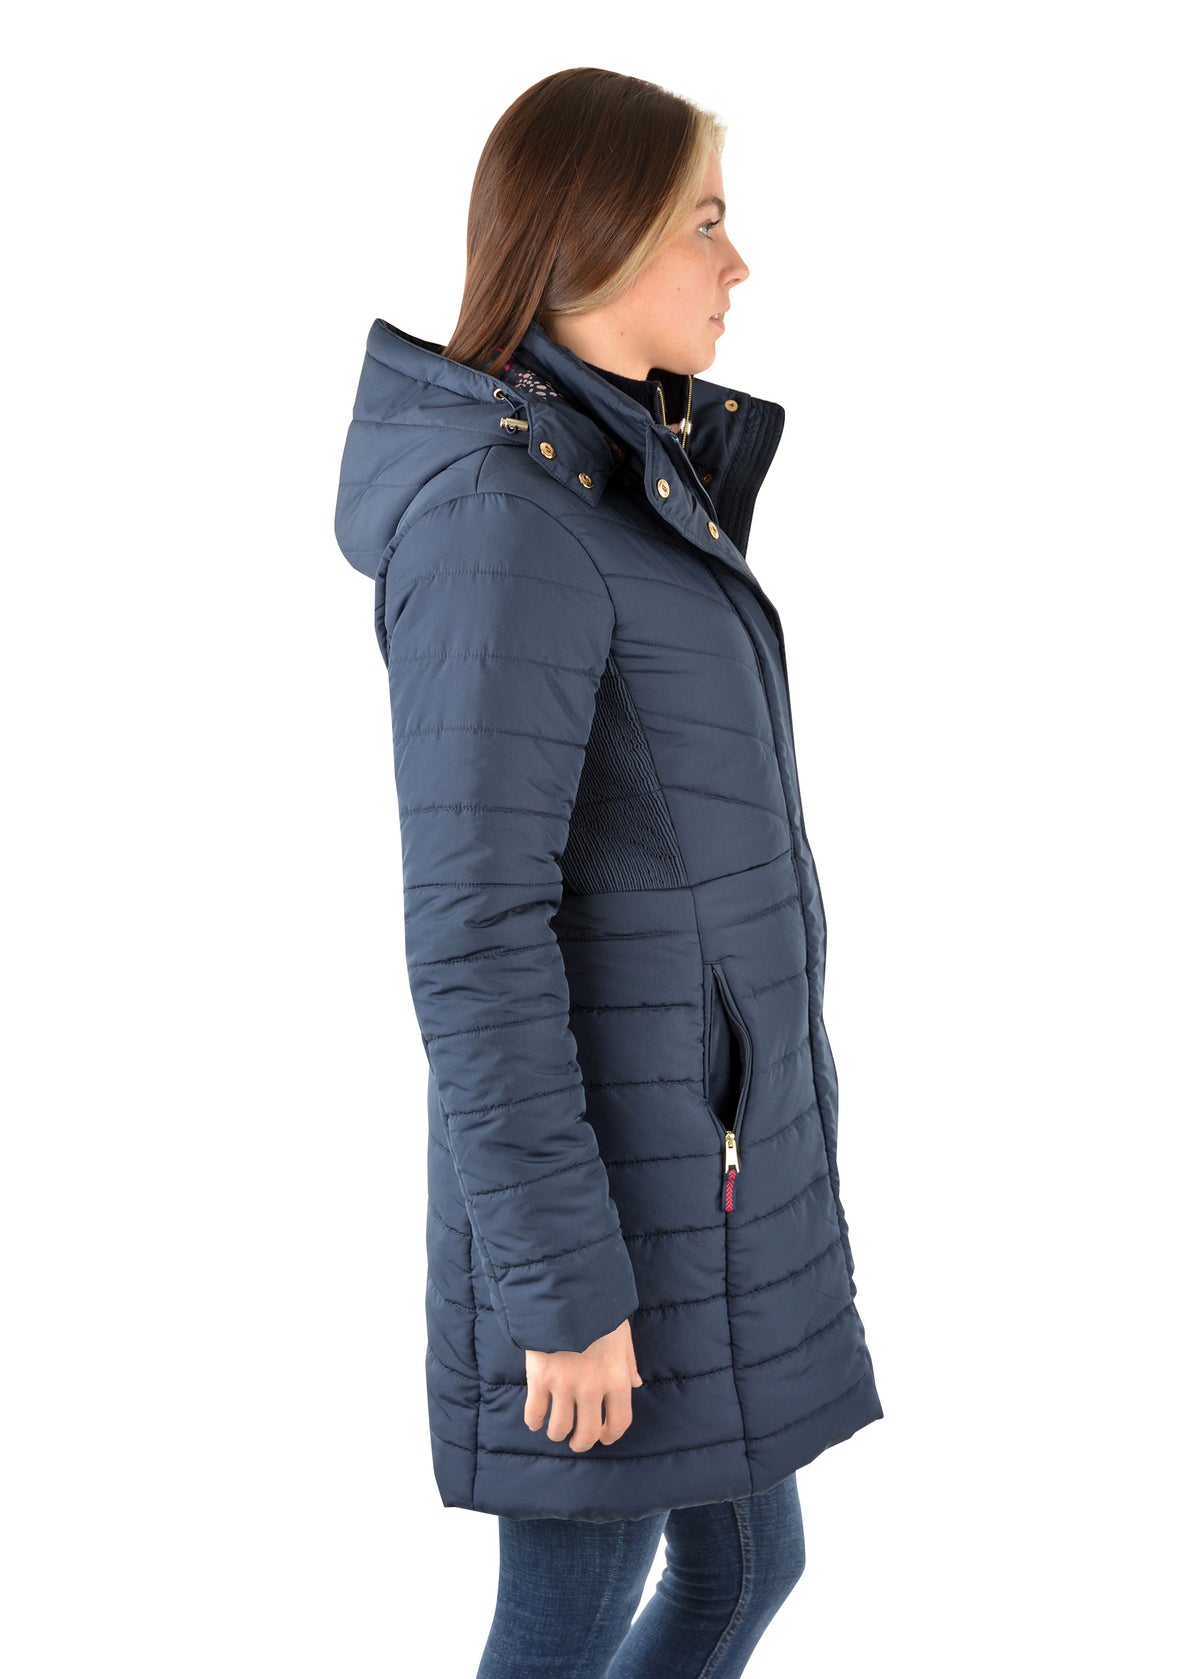 Thomas Cook Womens Mayfield Jacket - Navy